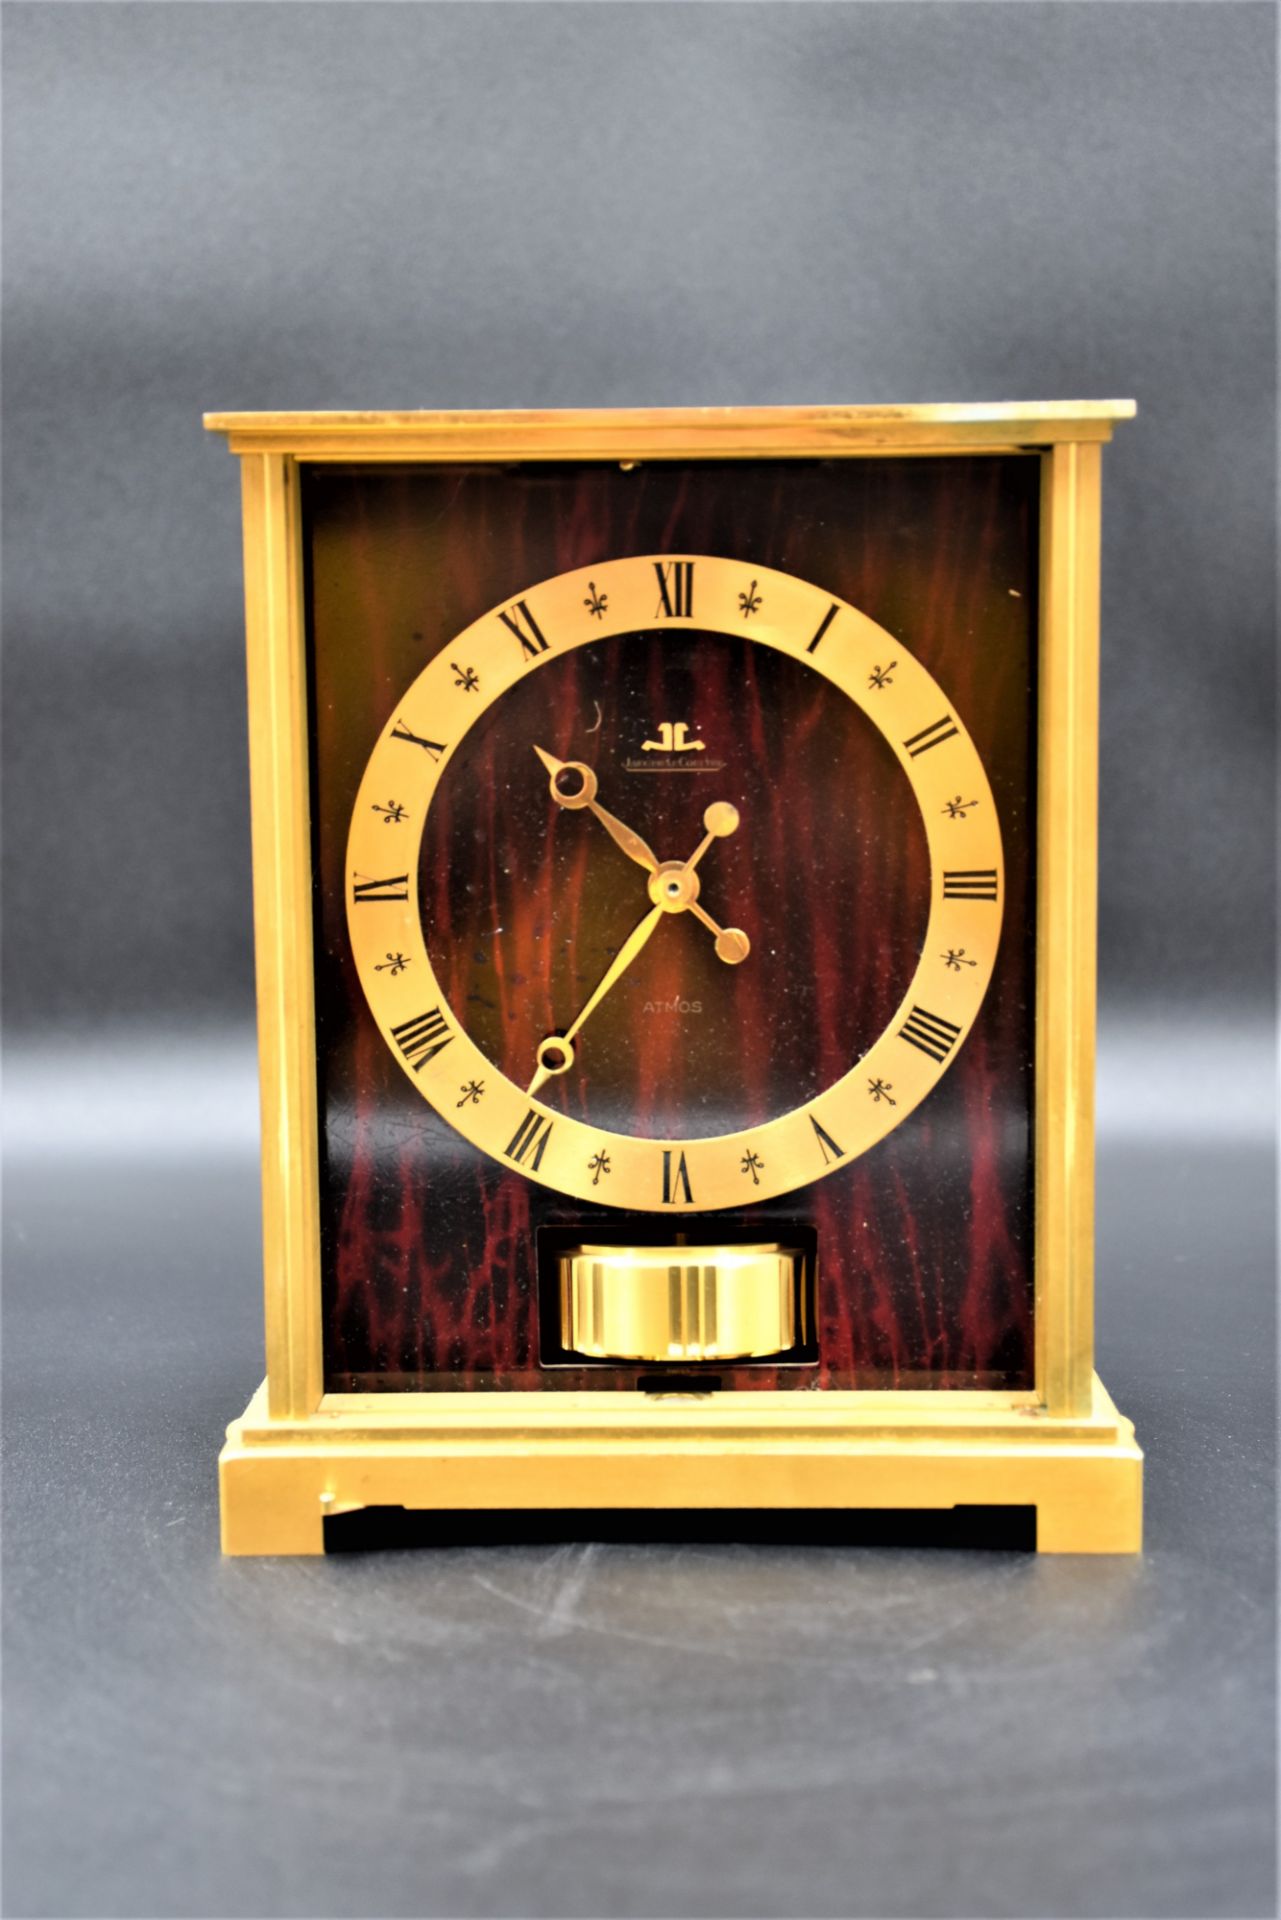 Jaeger Lecoultre Atmos type clock. Missing glass. Height: 22 cm.